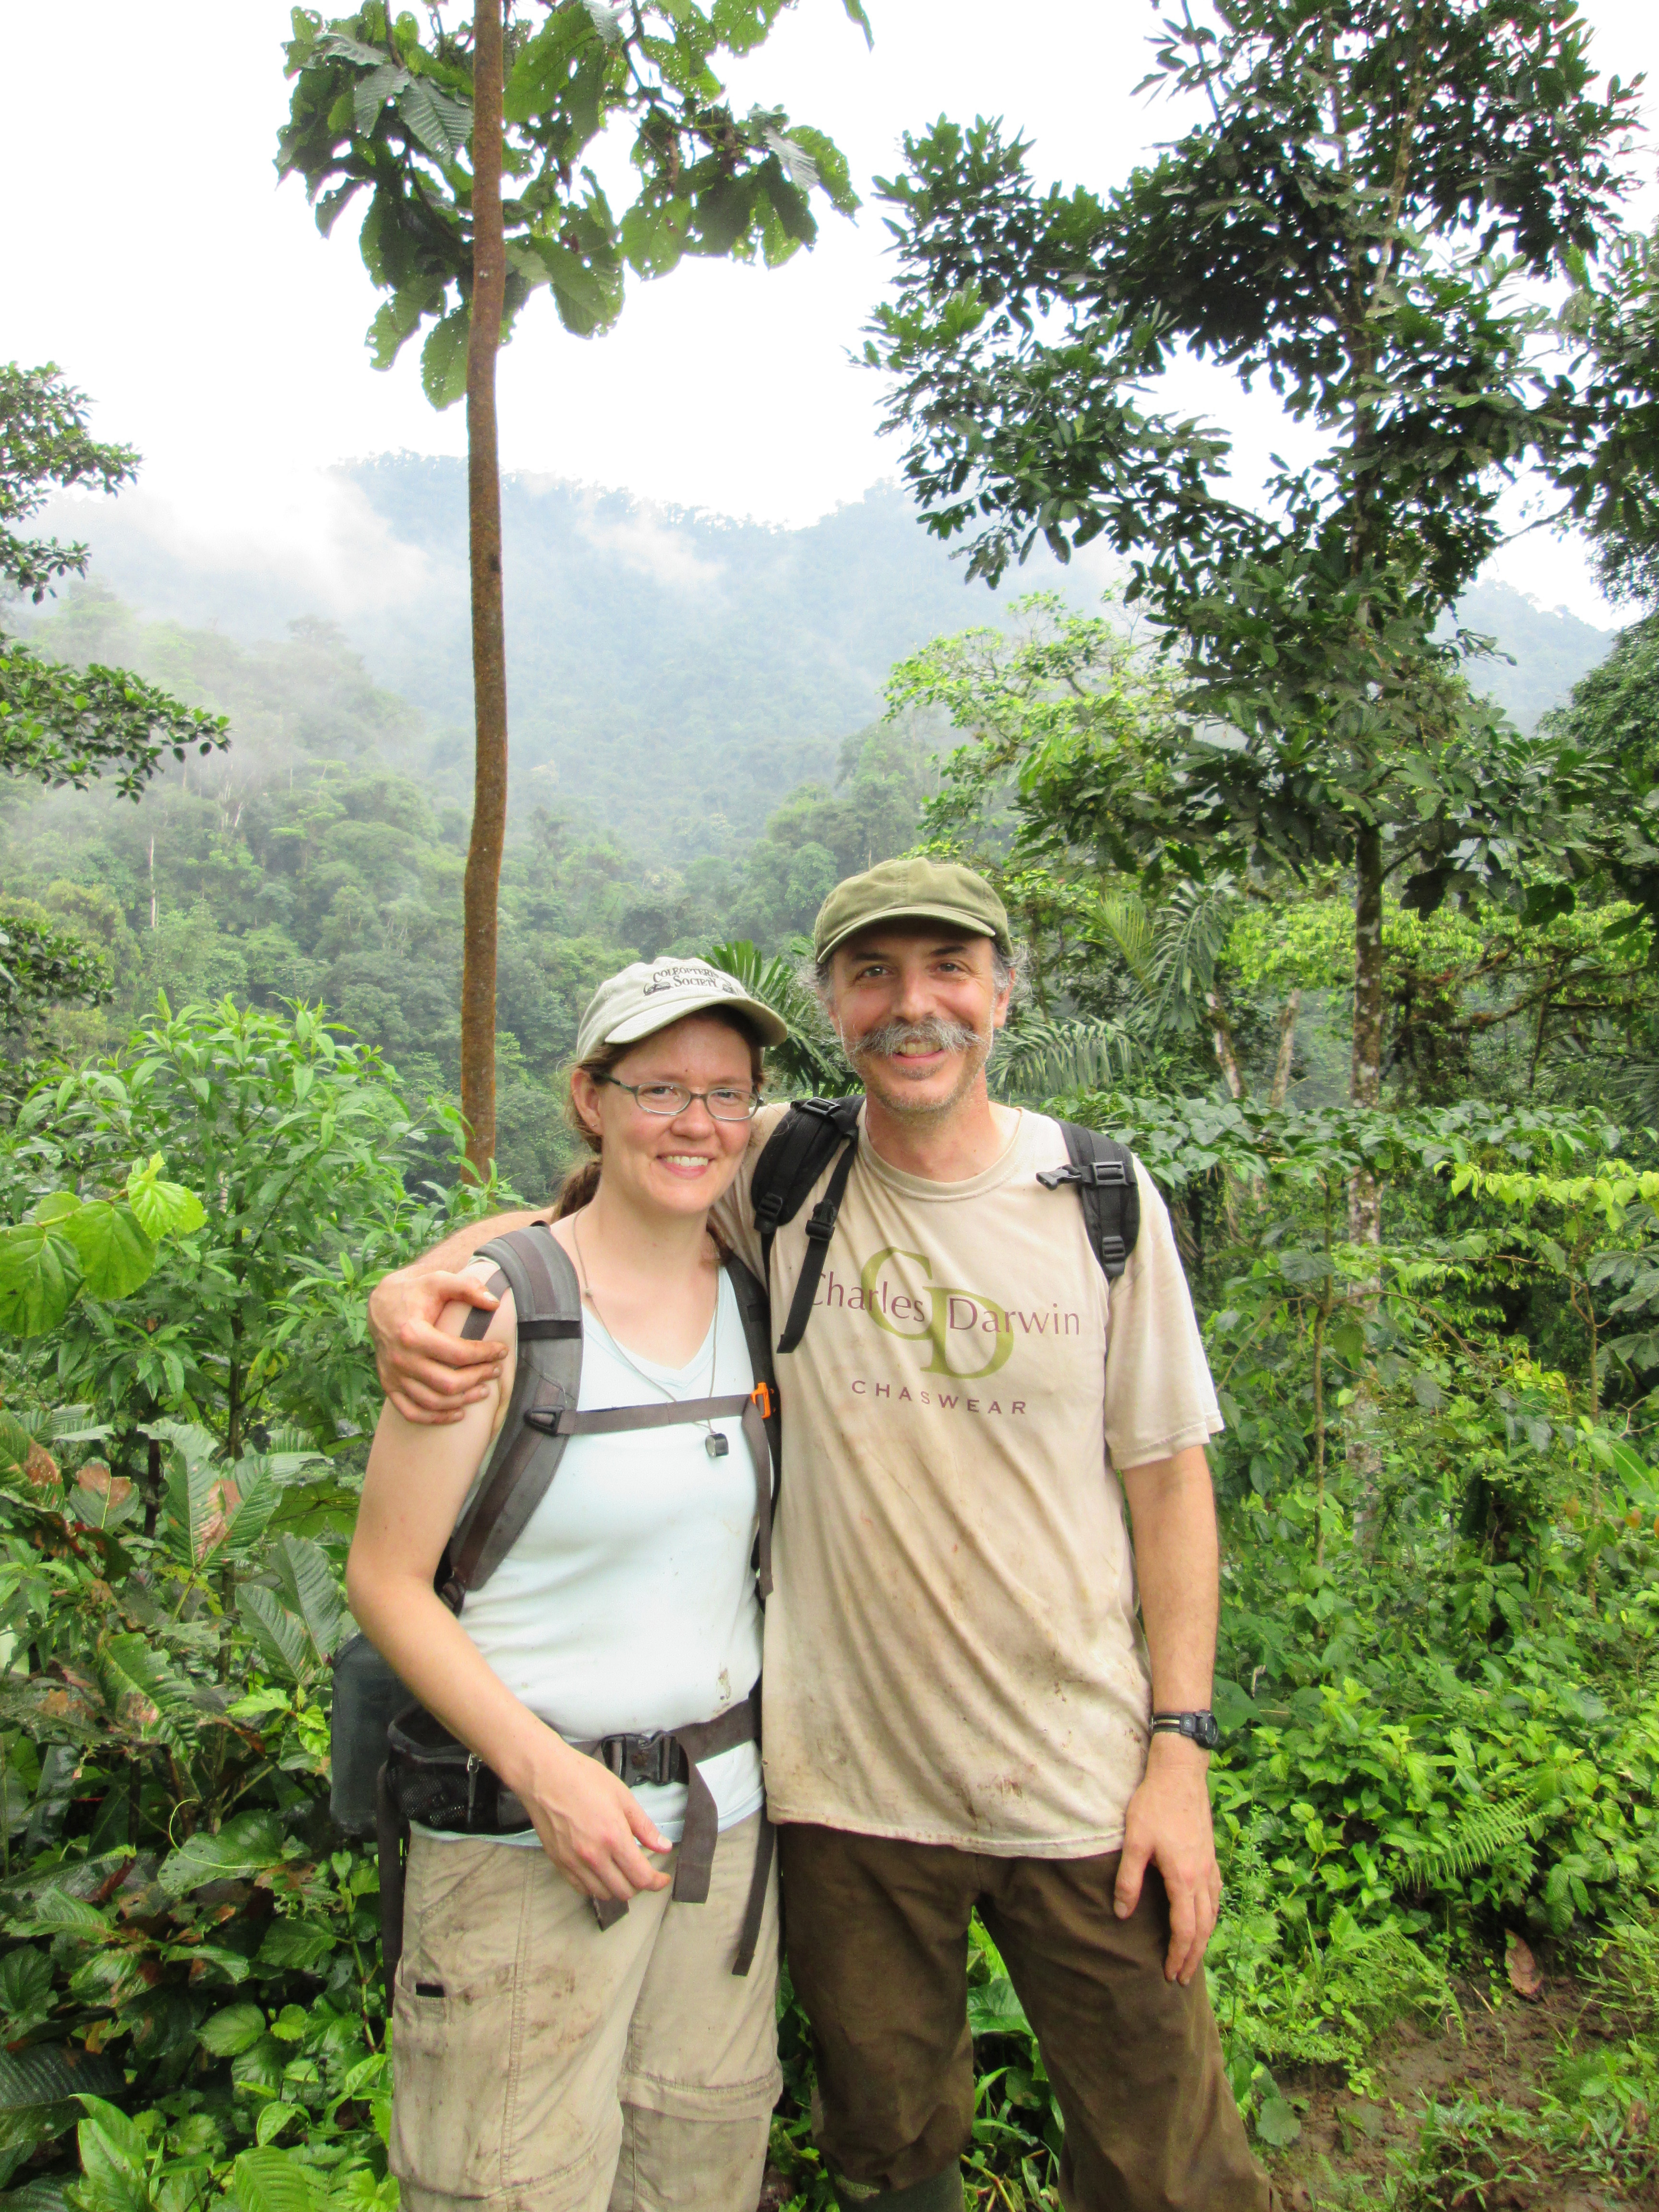 Sarah Smith and Anthony Cognato are photographed in front of dense green foliage and misty hilltops in Ecuador in 2015.